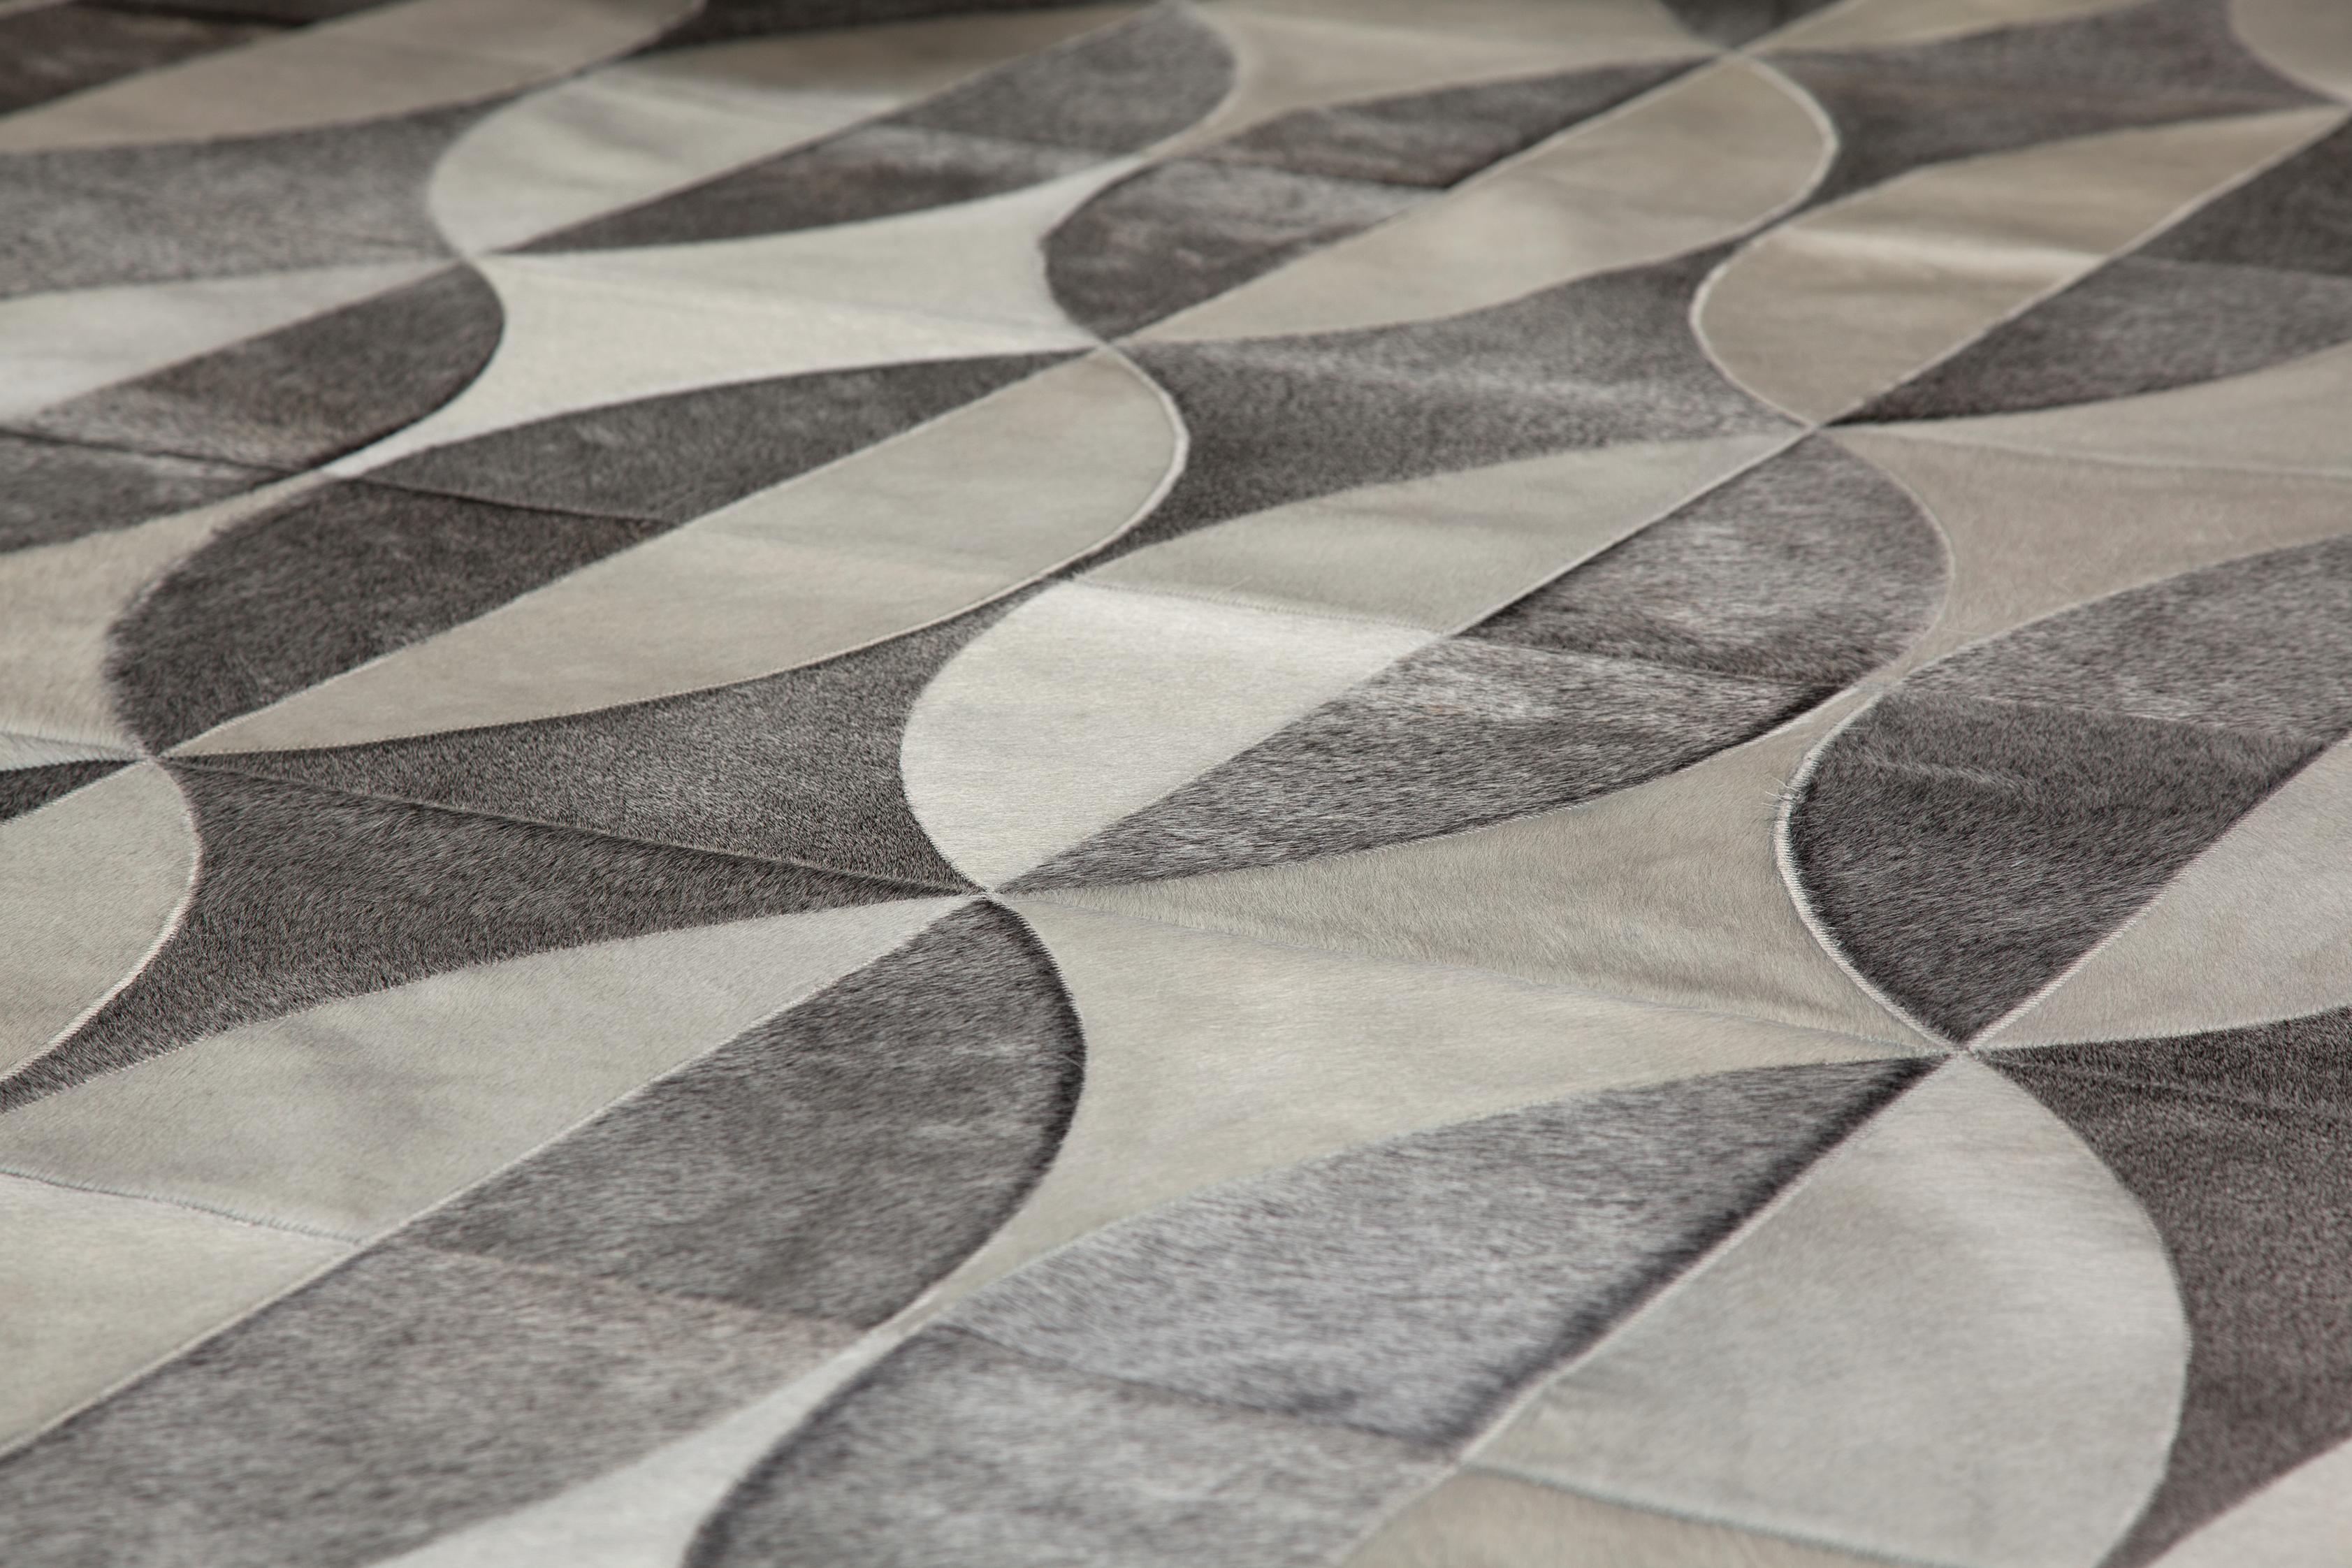 The Iris design uses curved, symmetrical lines with varying sets of color repetition to create a rug that is both visually engaging and sophisticated. Made with heather grey and white cowhides, the Iris features our two of our most exclusive cowhide